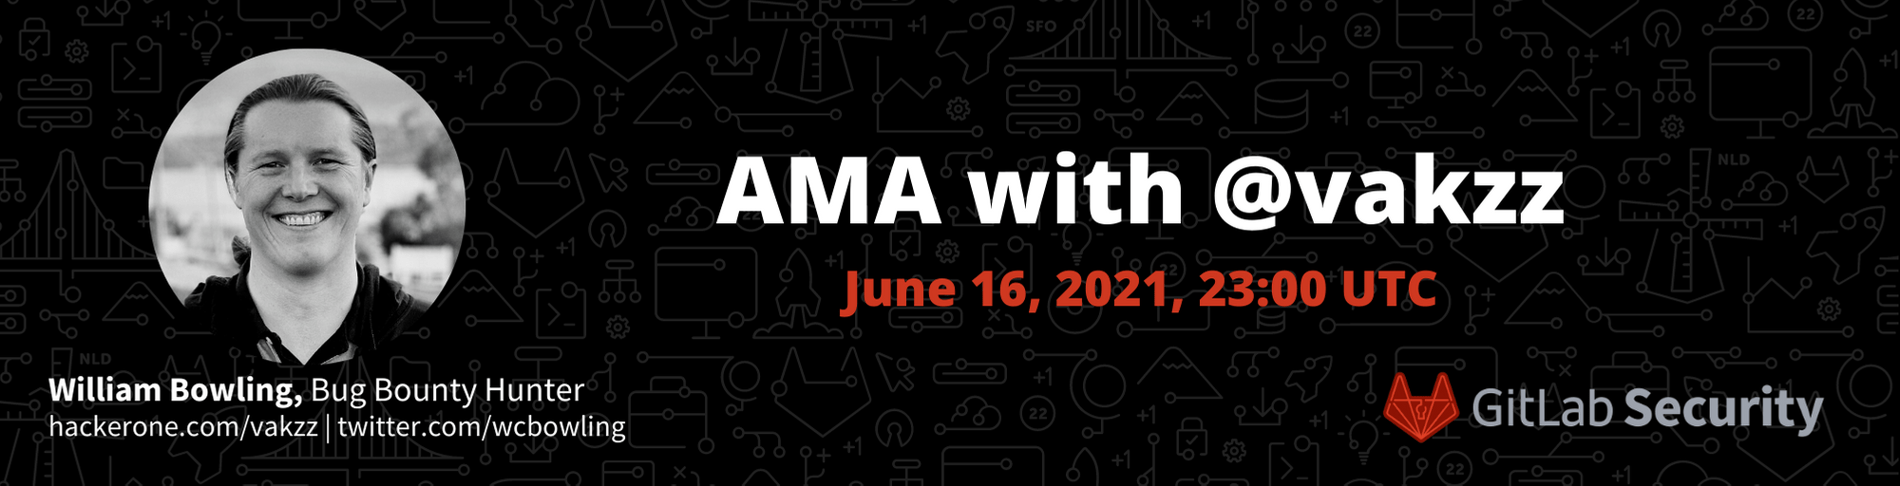 June 16 AMA with William Bowling